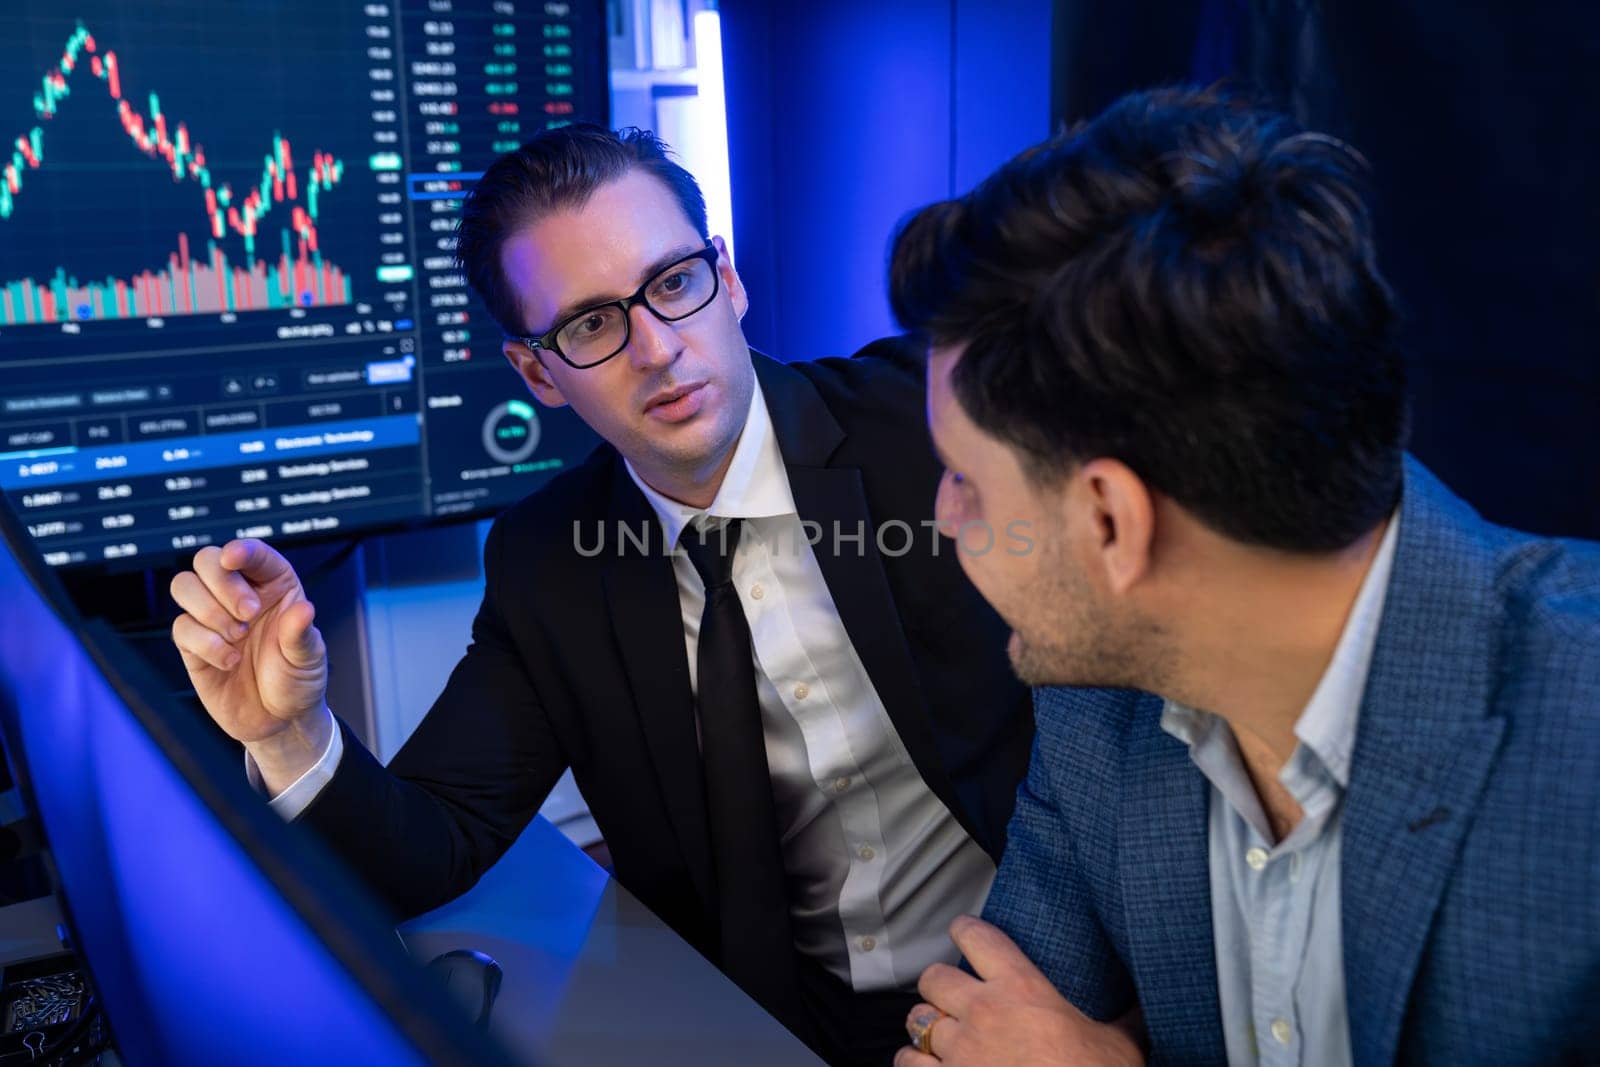 Two stock exchange traders discussing dynamic investment graph in currency rate on monitor at night. Businessman partners coffee meeting in high stock market in neon light at workplace. Sellable.